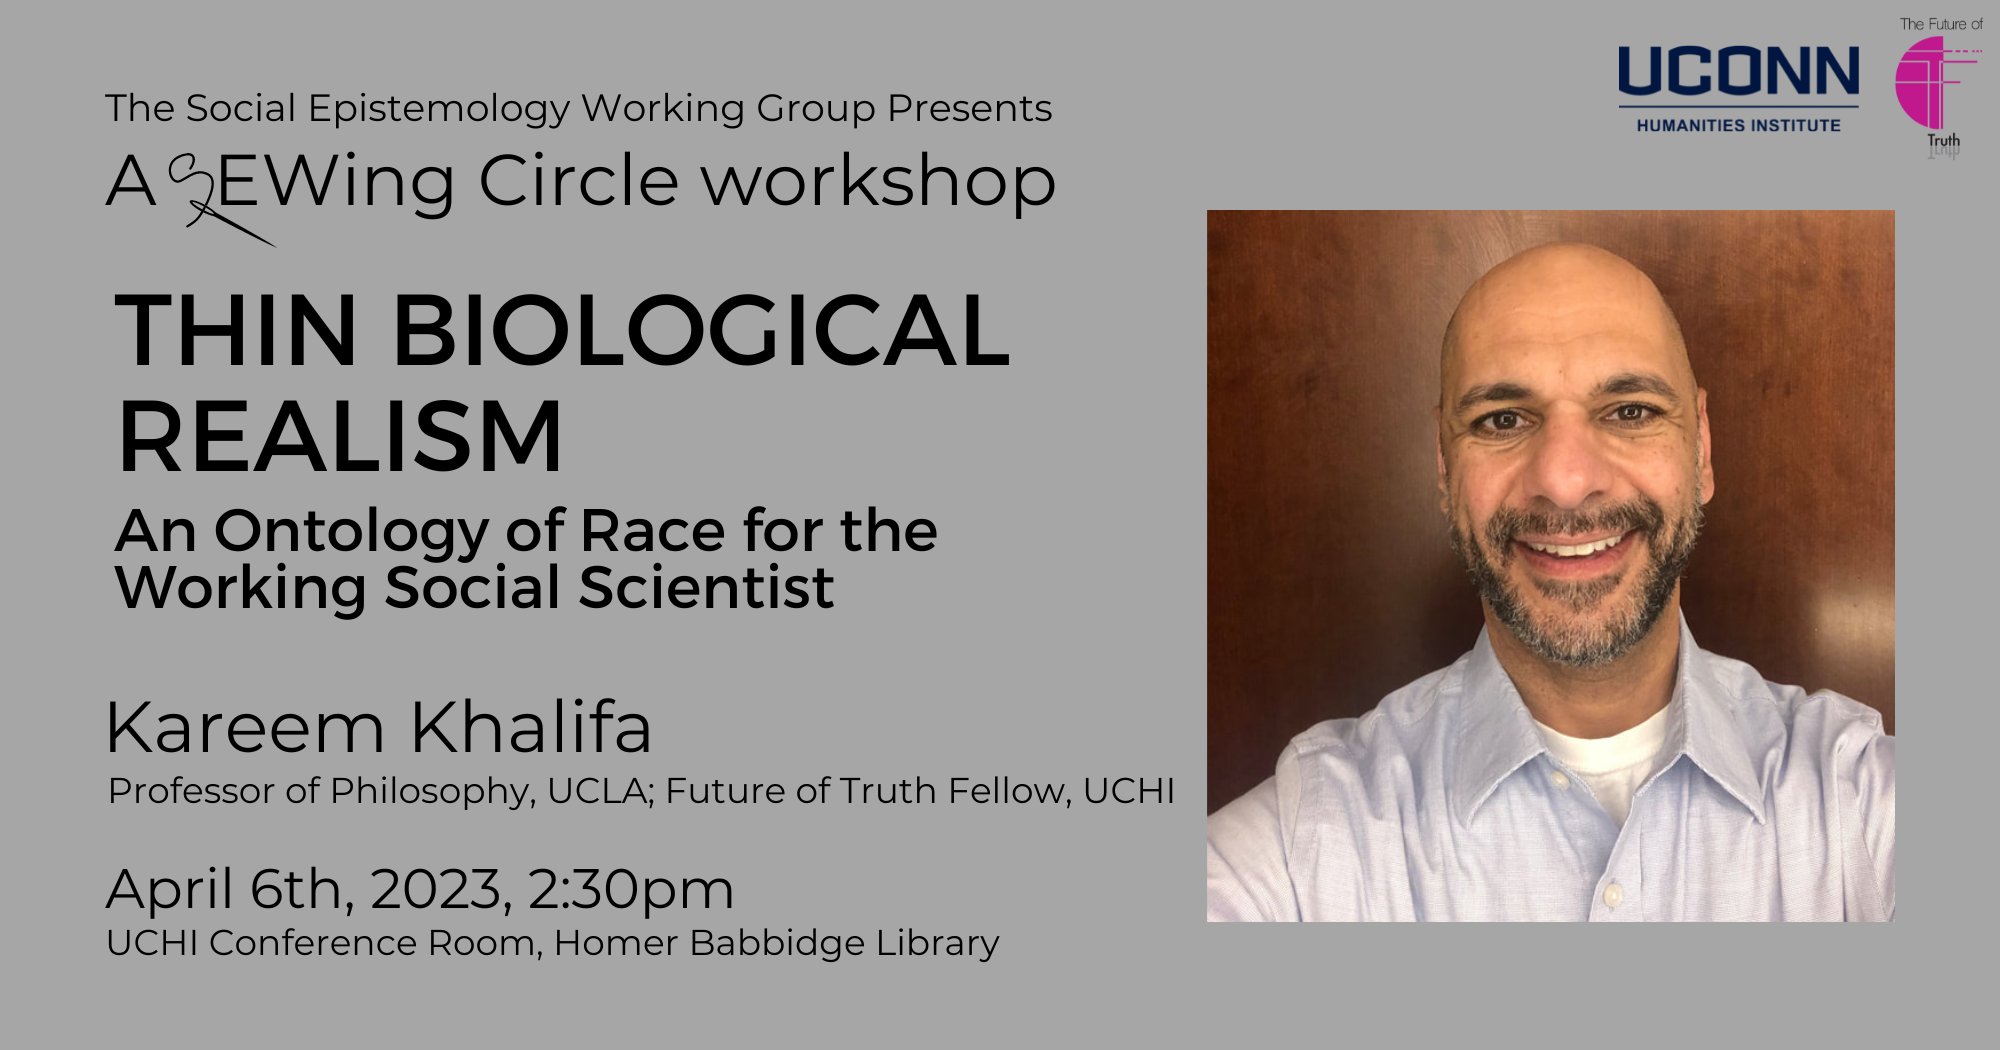 The Social Epistemology Working Group presents a Sewing Circle Workshop. "Thin Biological Realism: An Ontology of Race for the Working Social Scientist." Kareem Khalifa, professor of Philosophy, UCLA; Future of Truth Fellow, UCHI. April 6, 2023, 2:30pm. UCHI Conference Room, Homer Babbidge Library